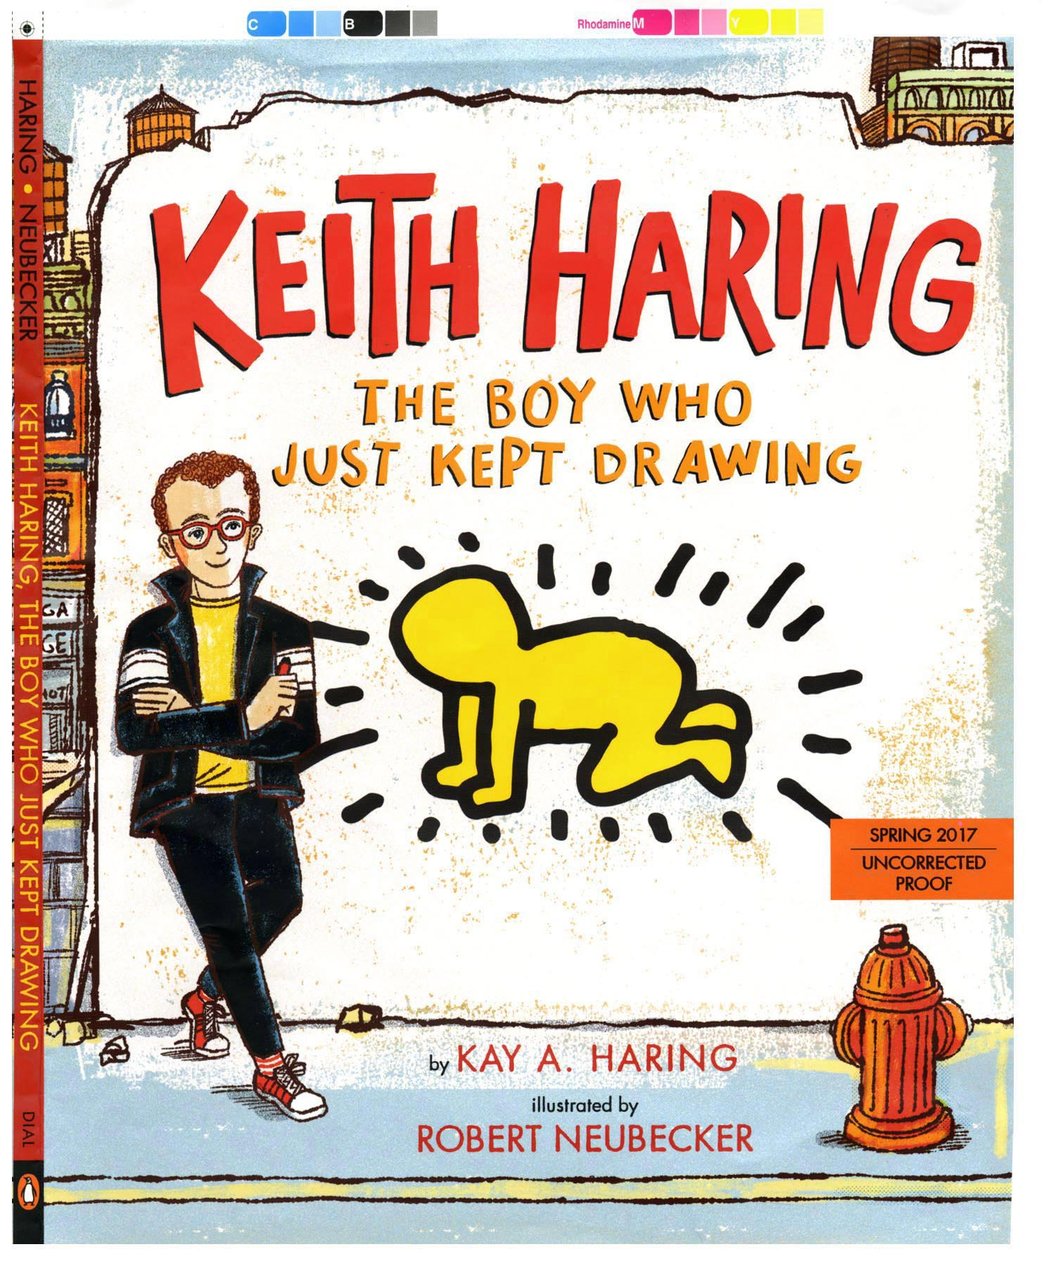 Keith Haring The Boy Who Just Kept Drawing book cover